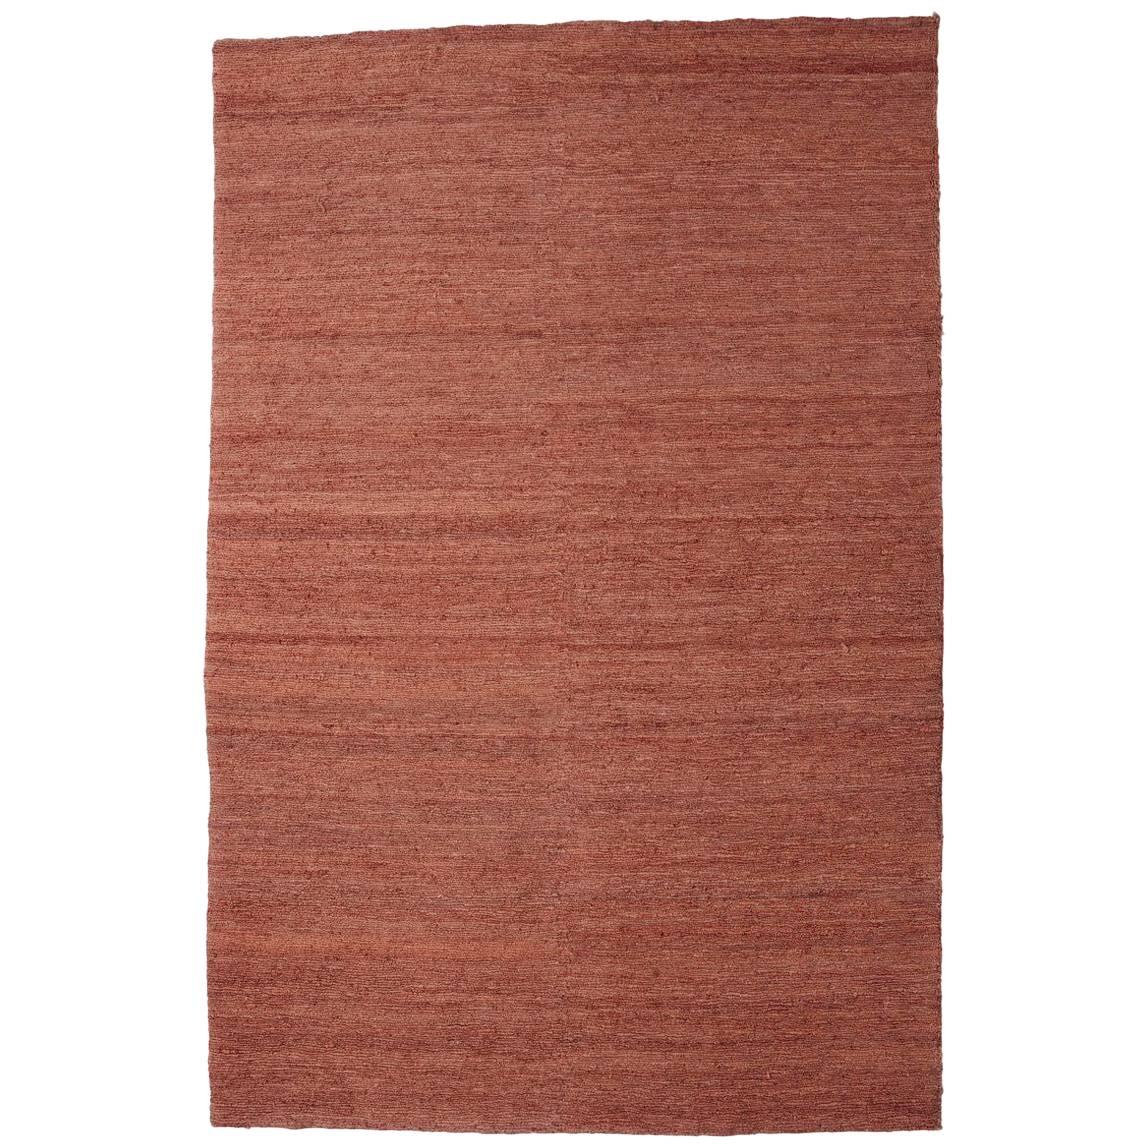 Terracotta Hand-Knotted Jute Earth Rug by Nani Marquina & Ariadna Miquel, Small